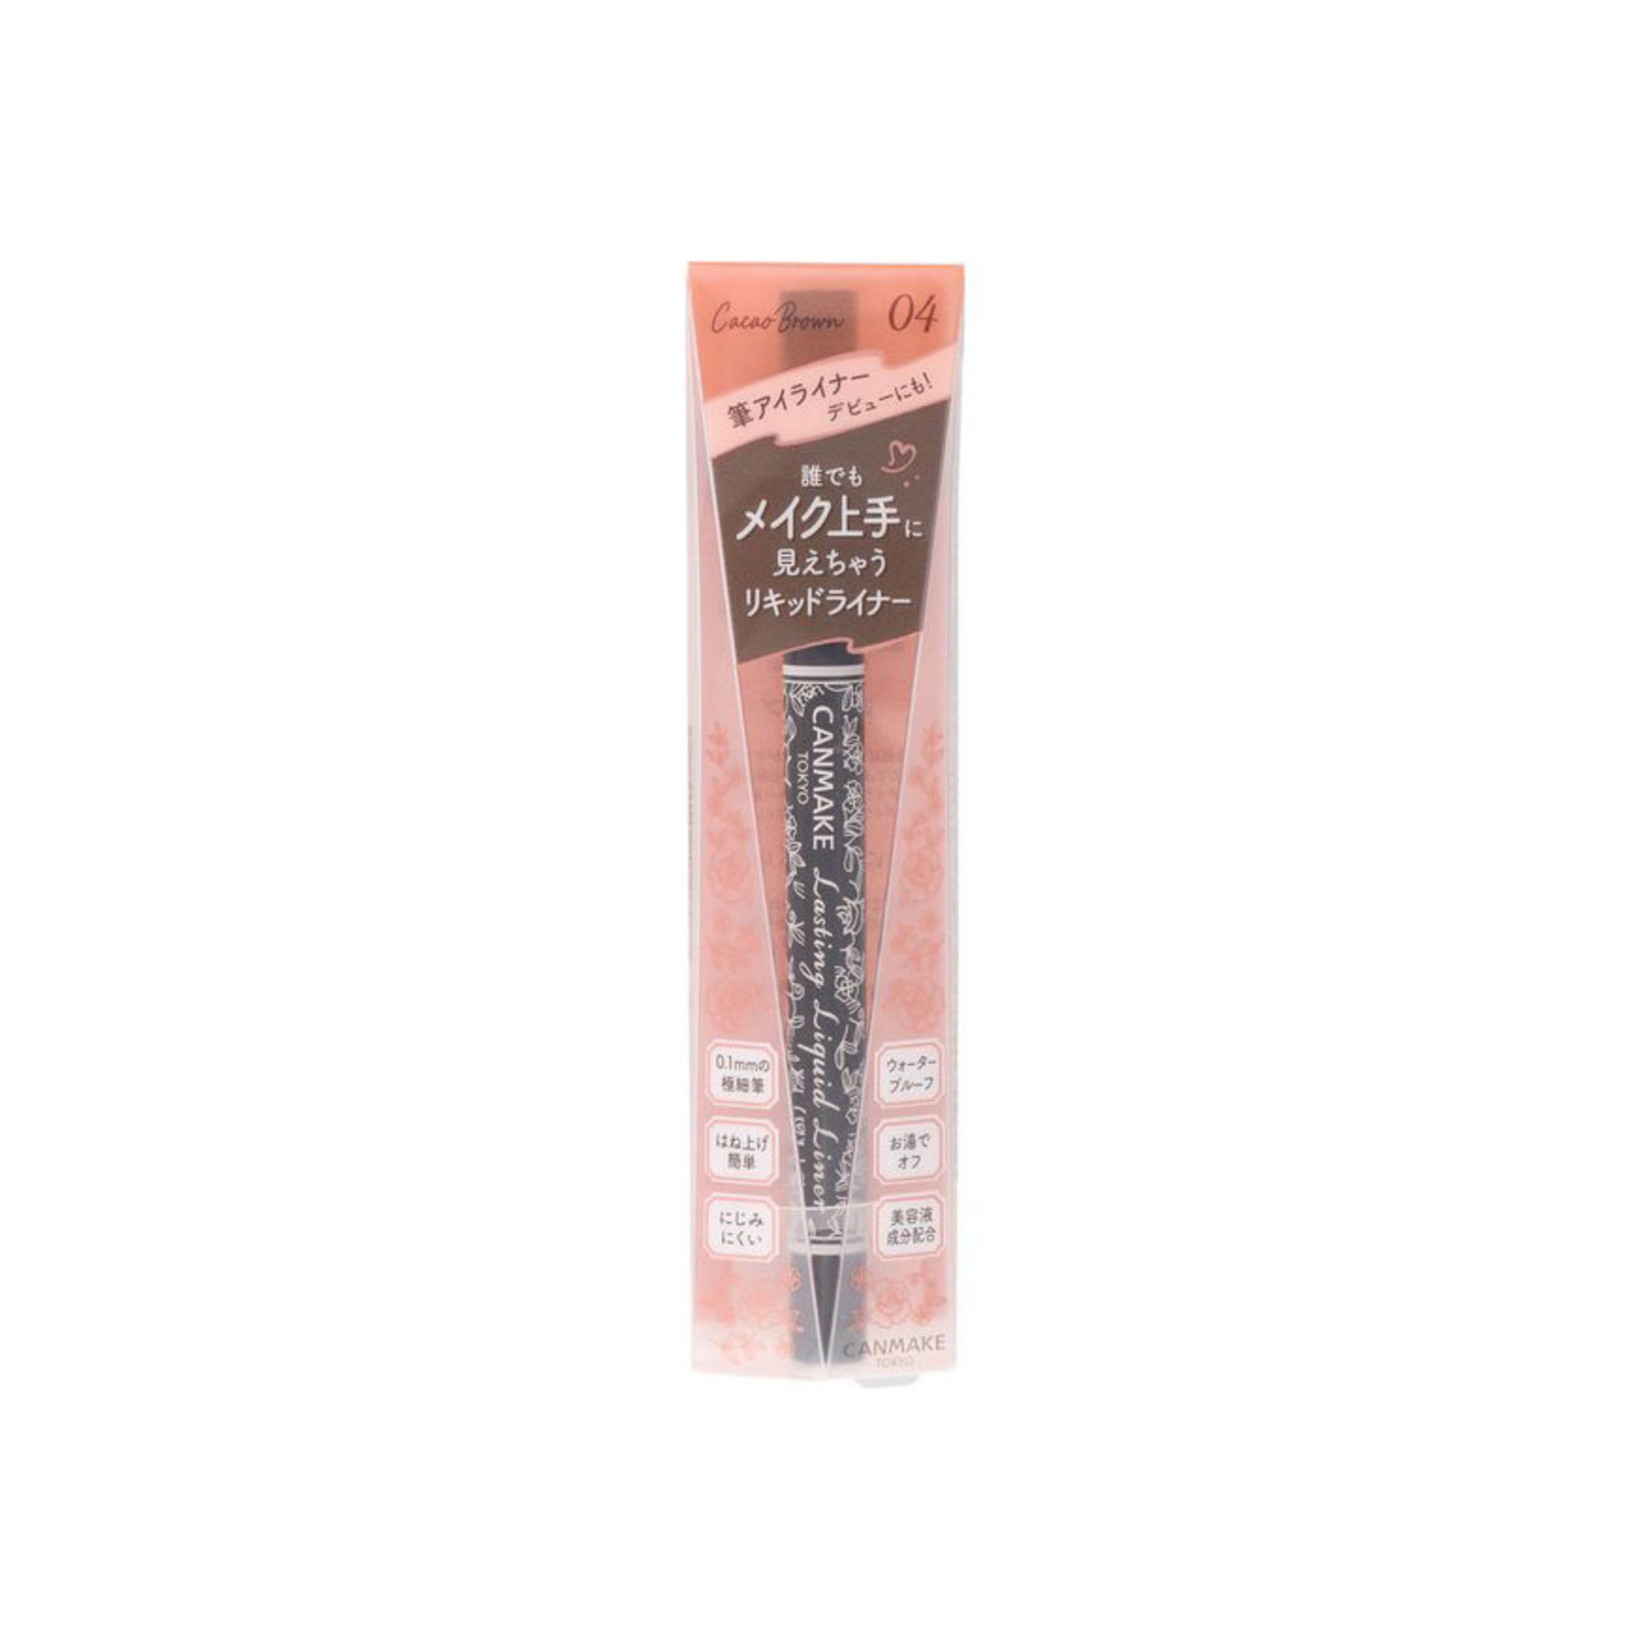 Canmake Canmake Lasting Liquid Liner 04 Cacao Brown